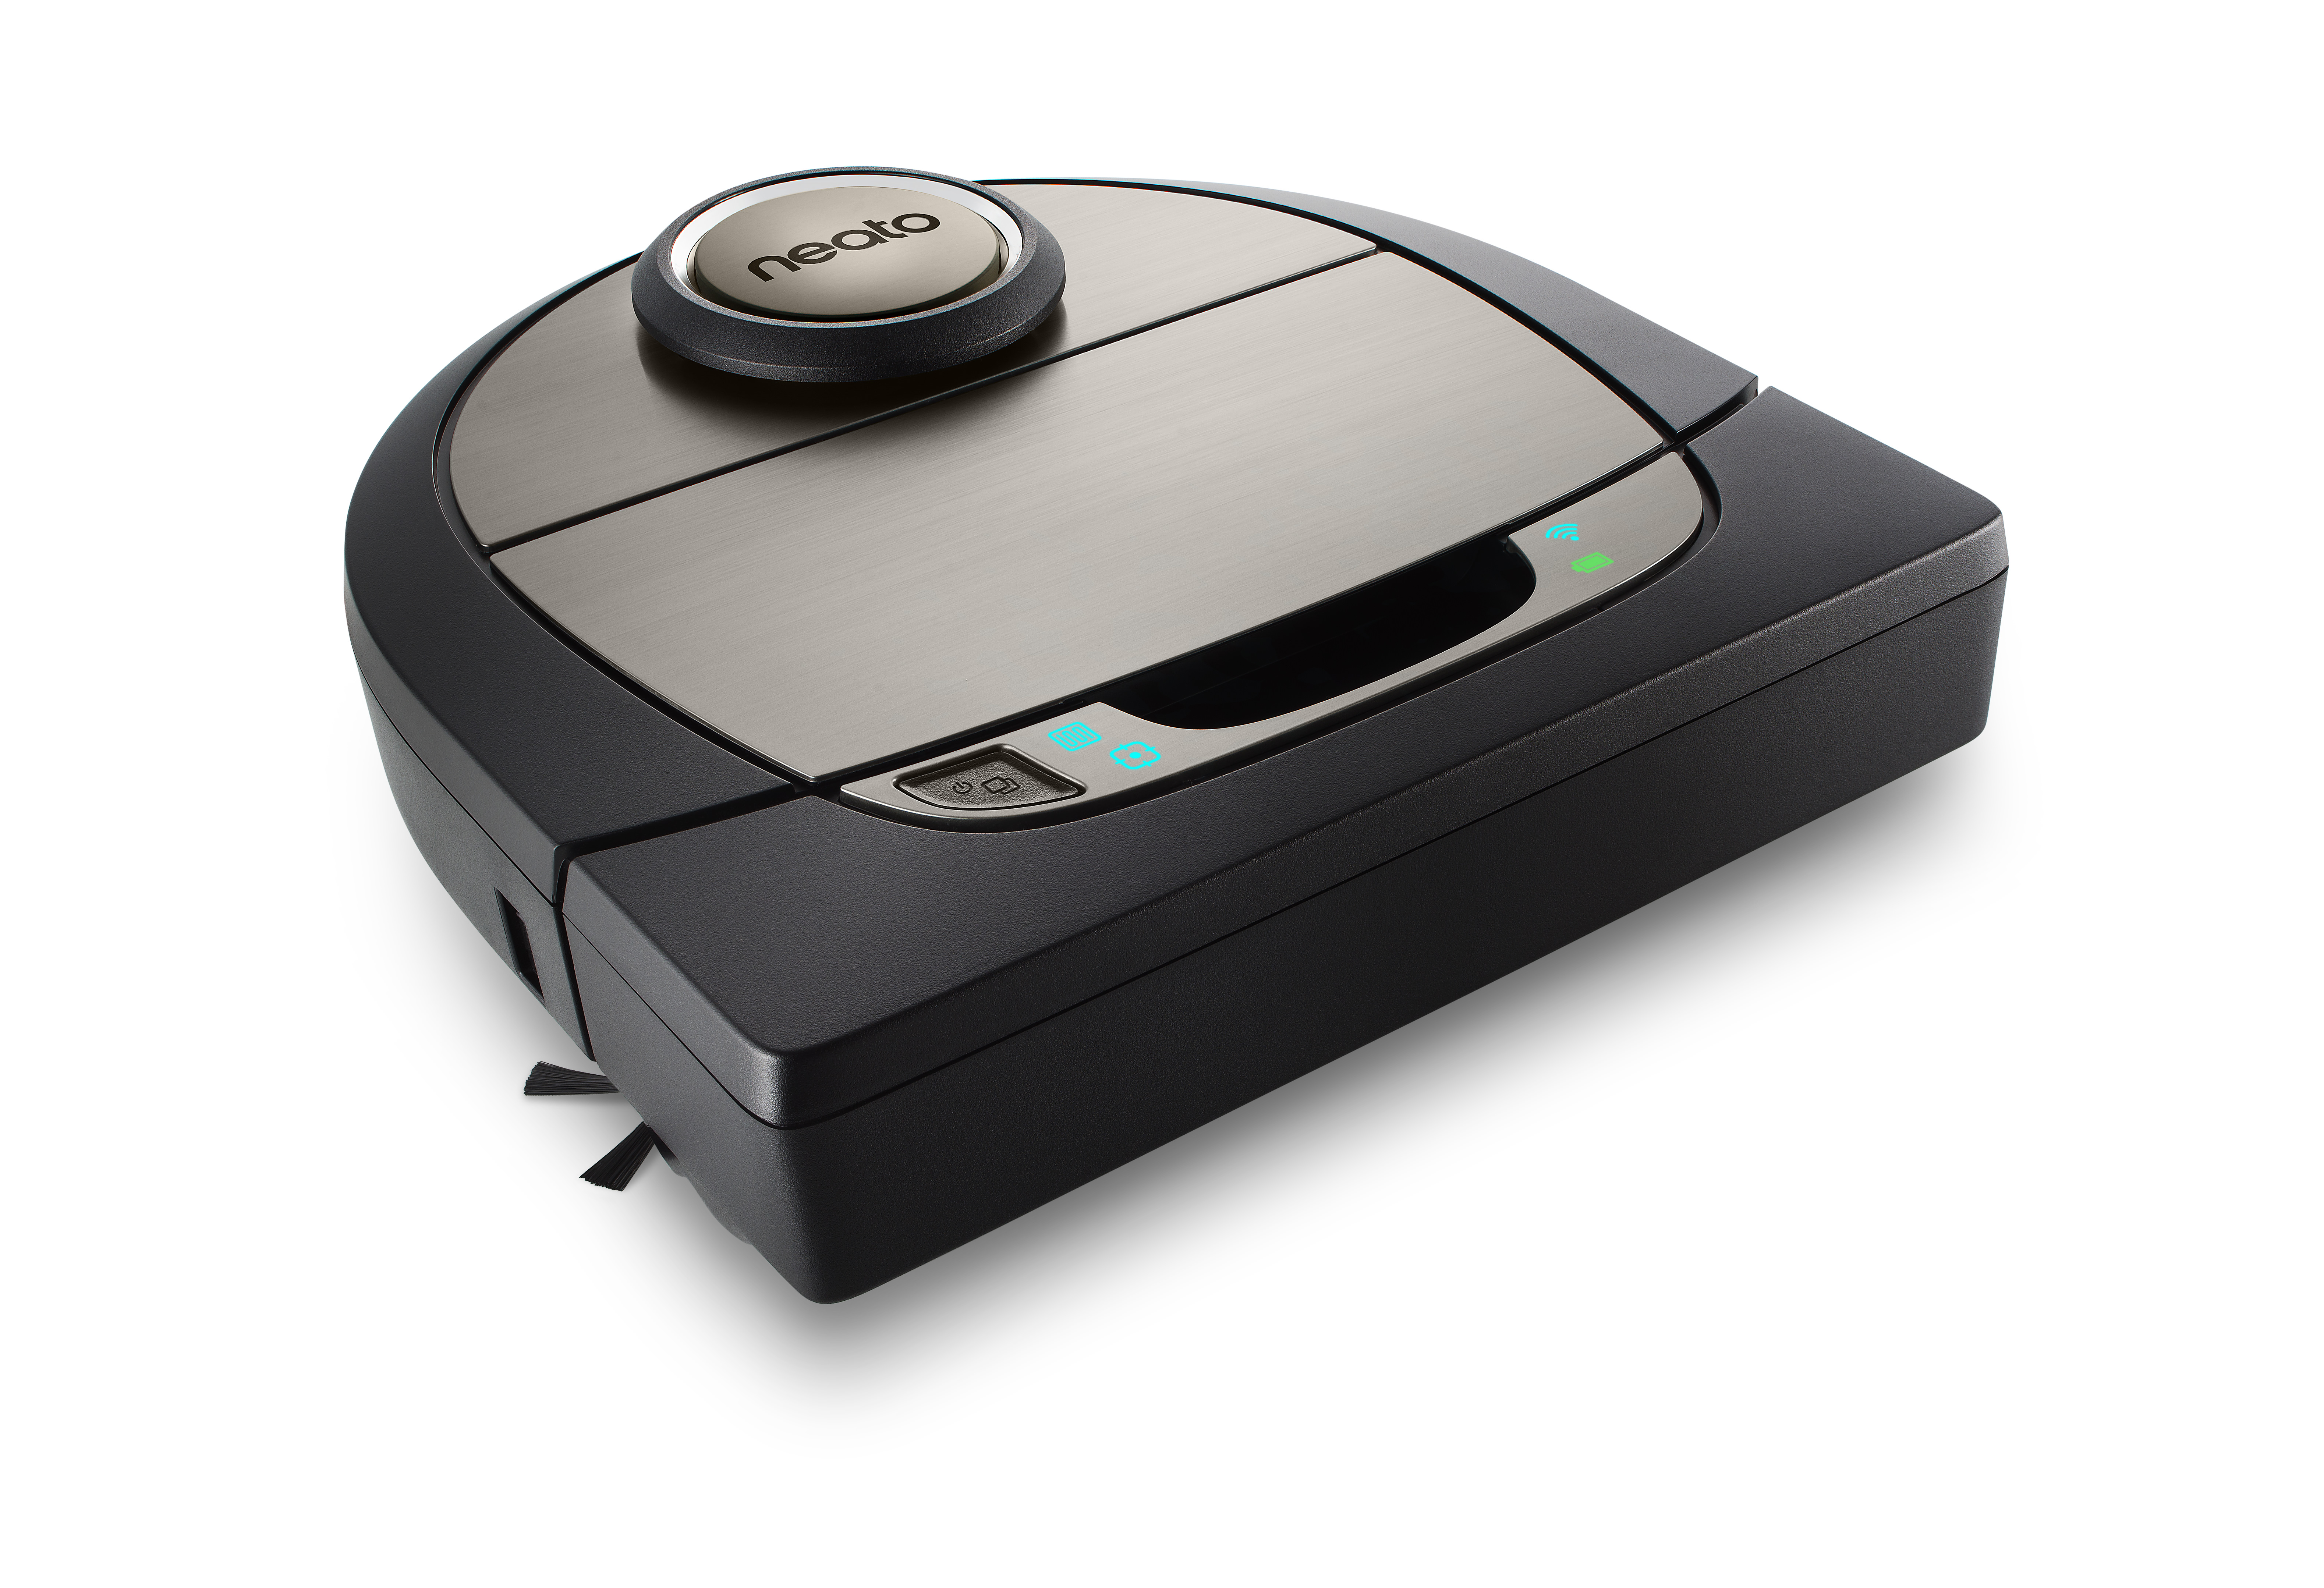 Neato Robotics Botvac D7 Wi-Fi Connected Robot Vacuum with Multi-floor Plan Mapping - image 1 of 8